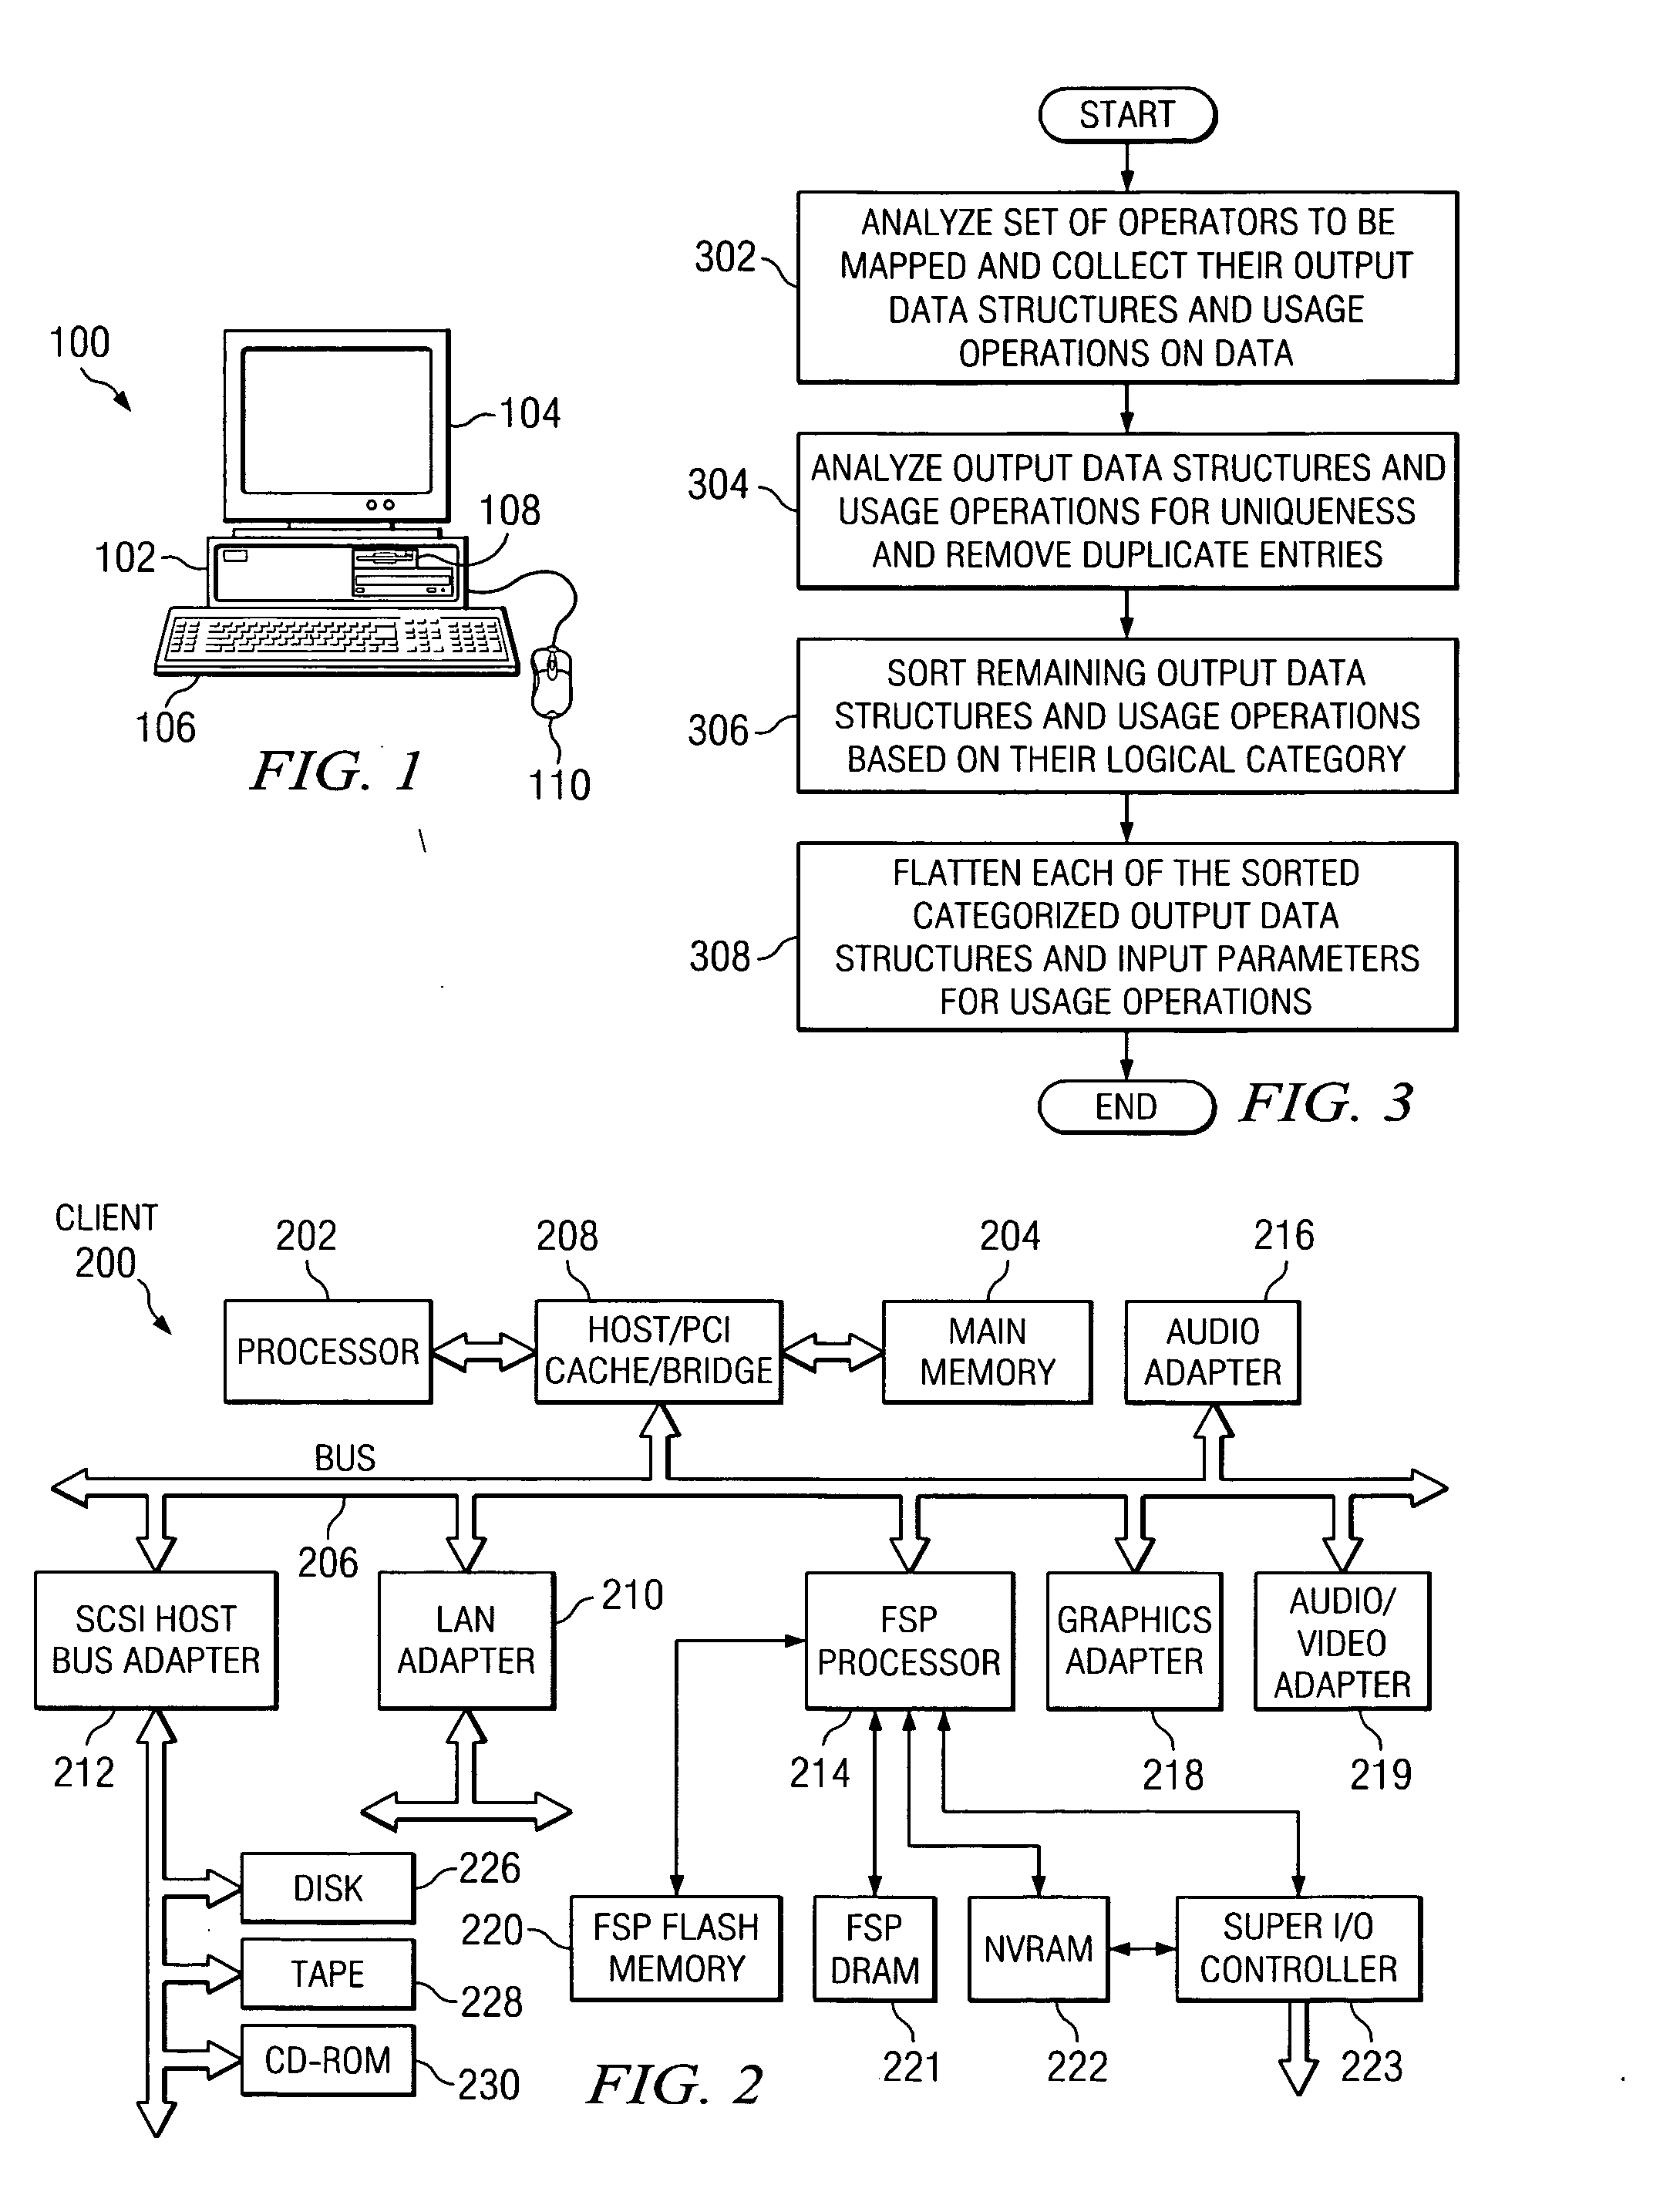 Method for using SNMP as an RPC mechanism for exporting the data structures of a remote library